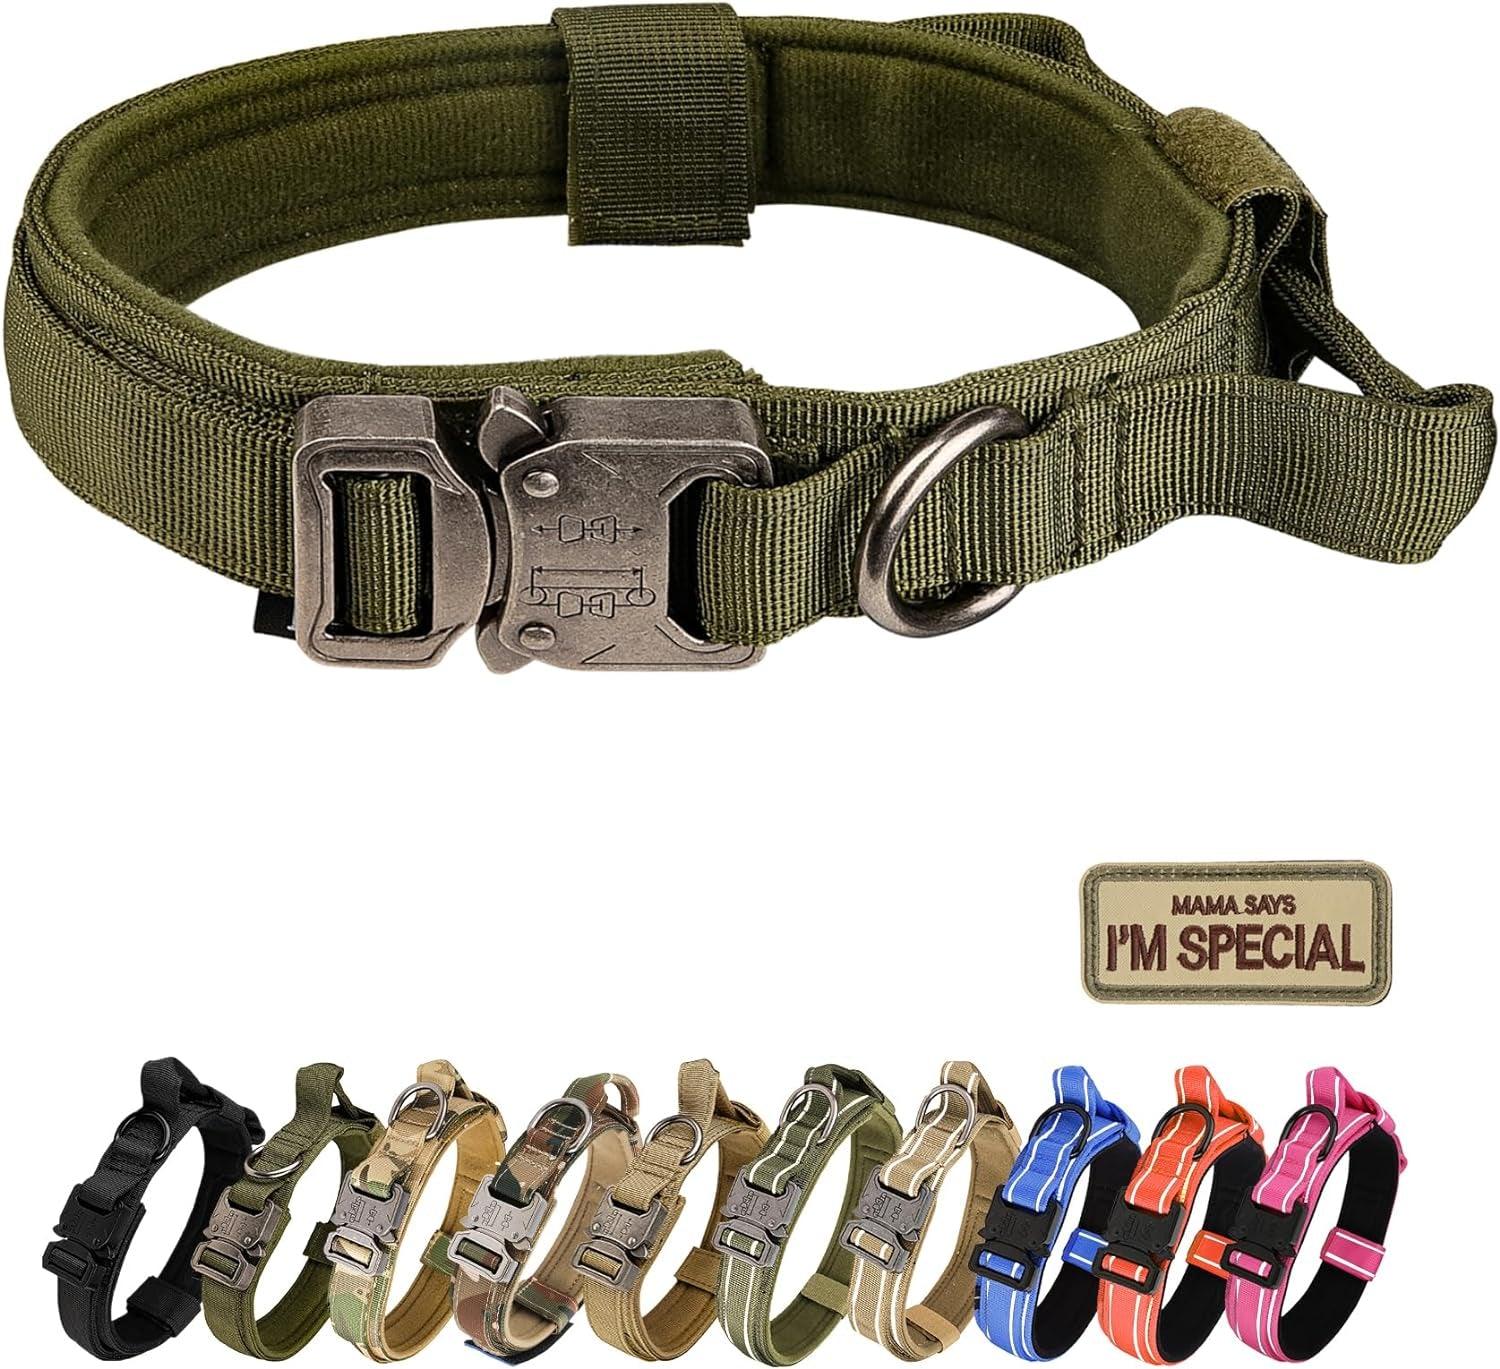 Tactical Dog Collar W/ (Mama Says I M Special Patch) - K9 Blood Bite